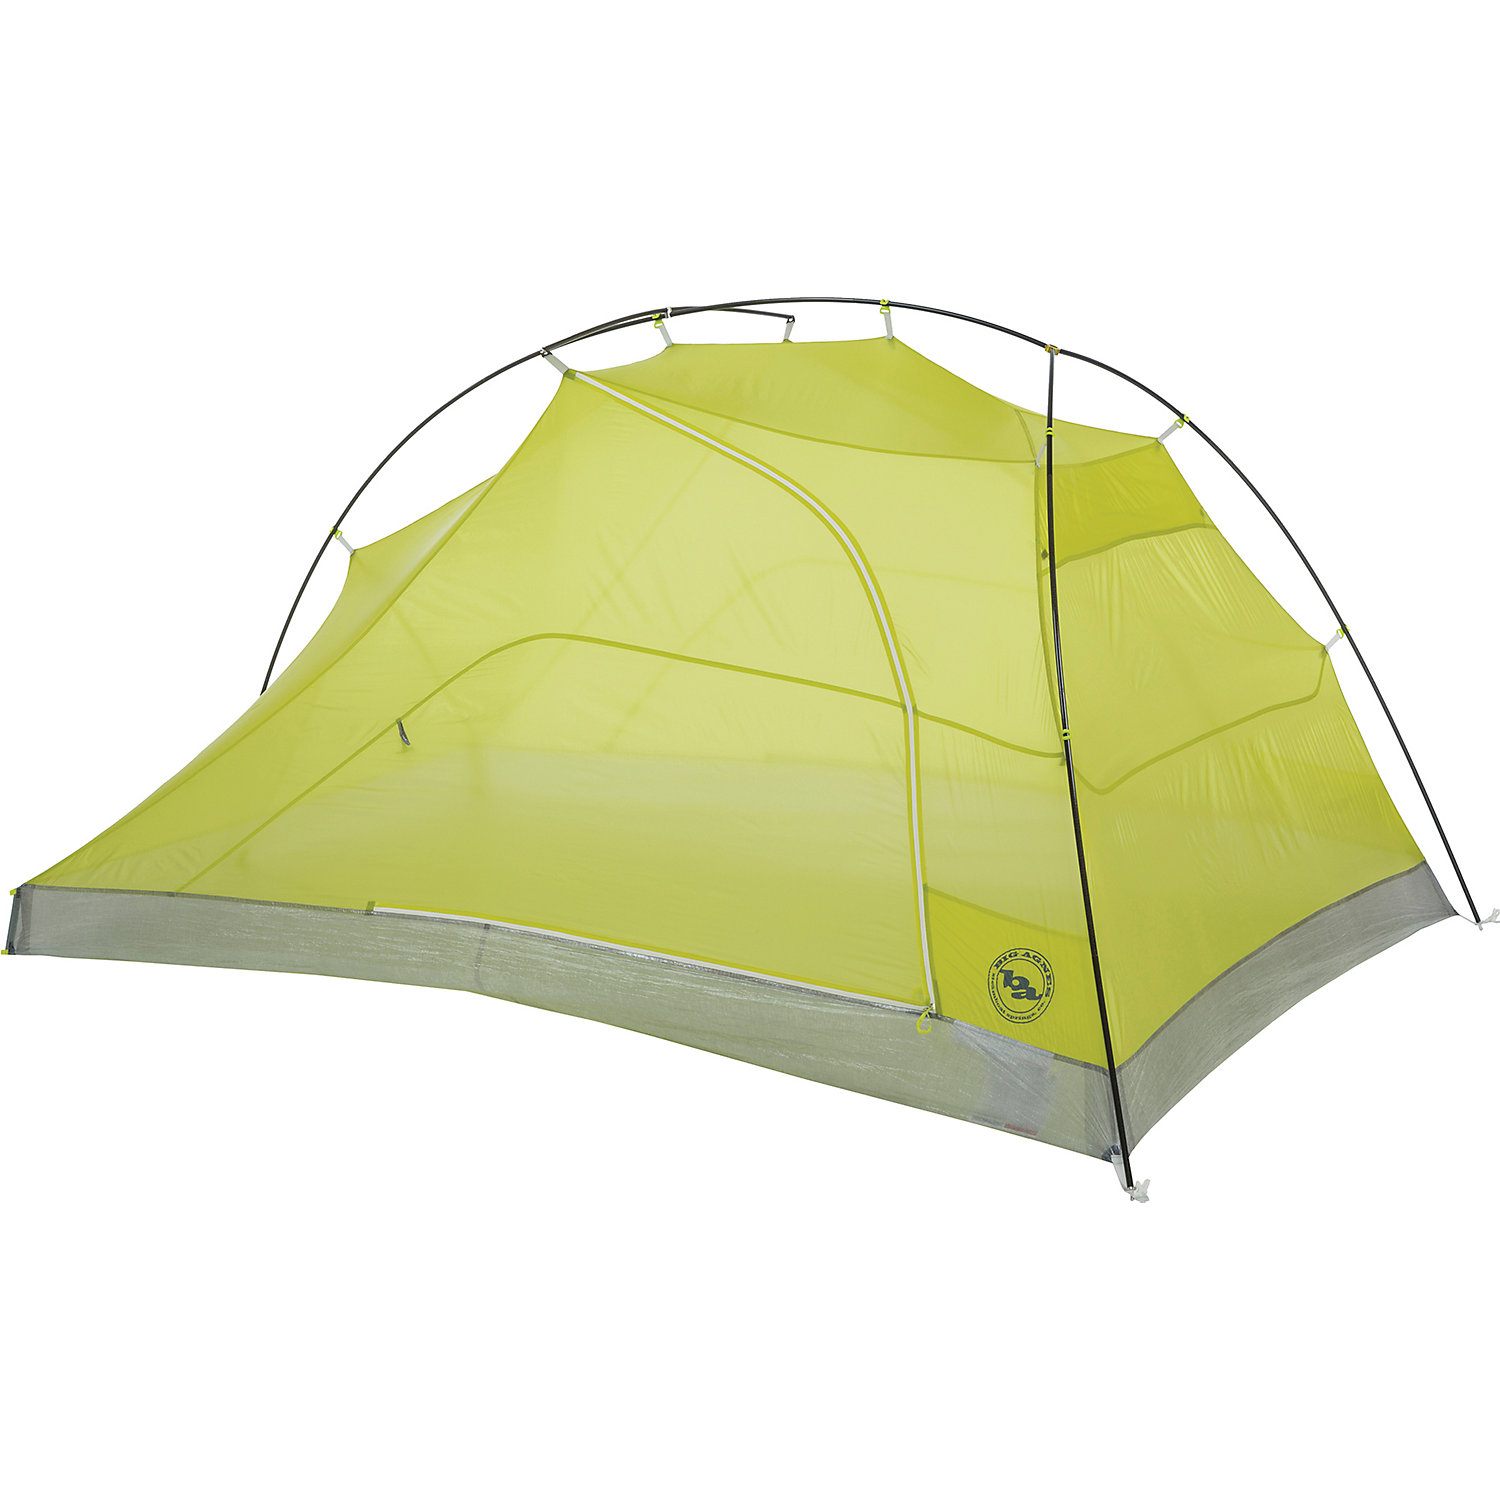 Big Agnes Tiger Wall 3 Person Carbon with Dyneema Tent